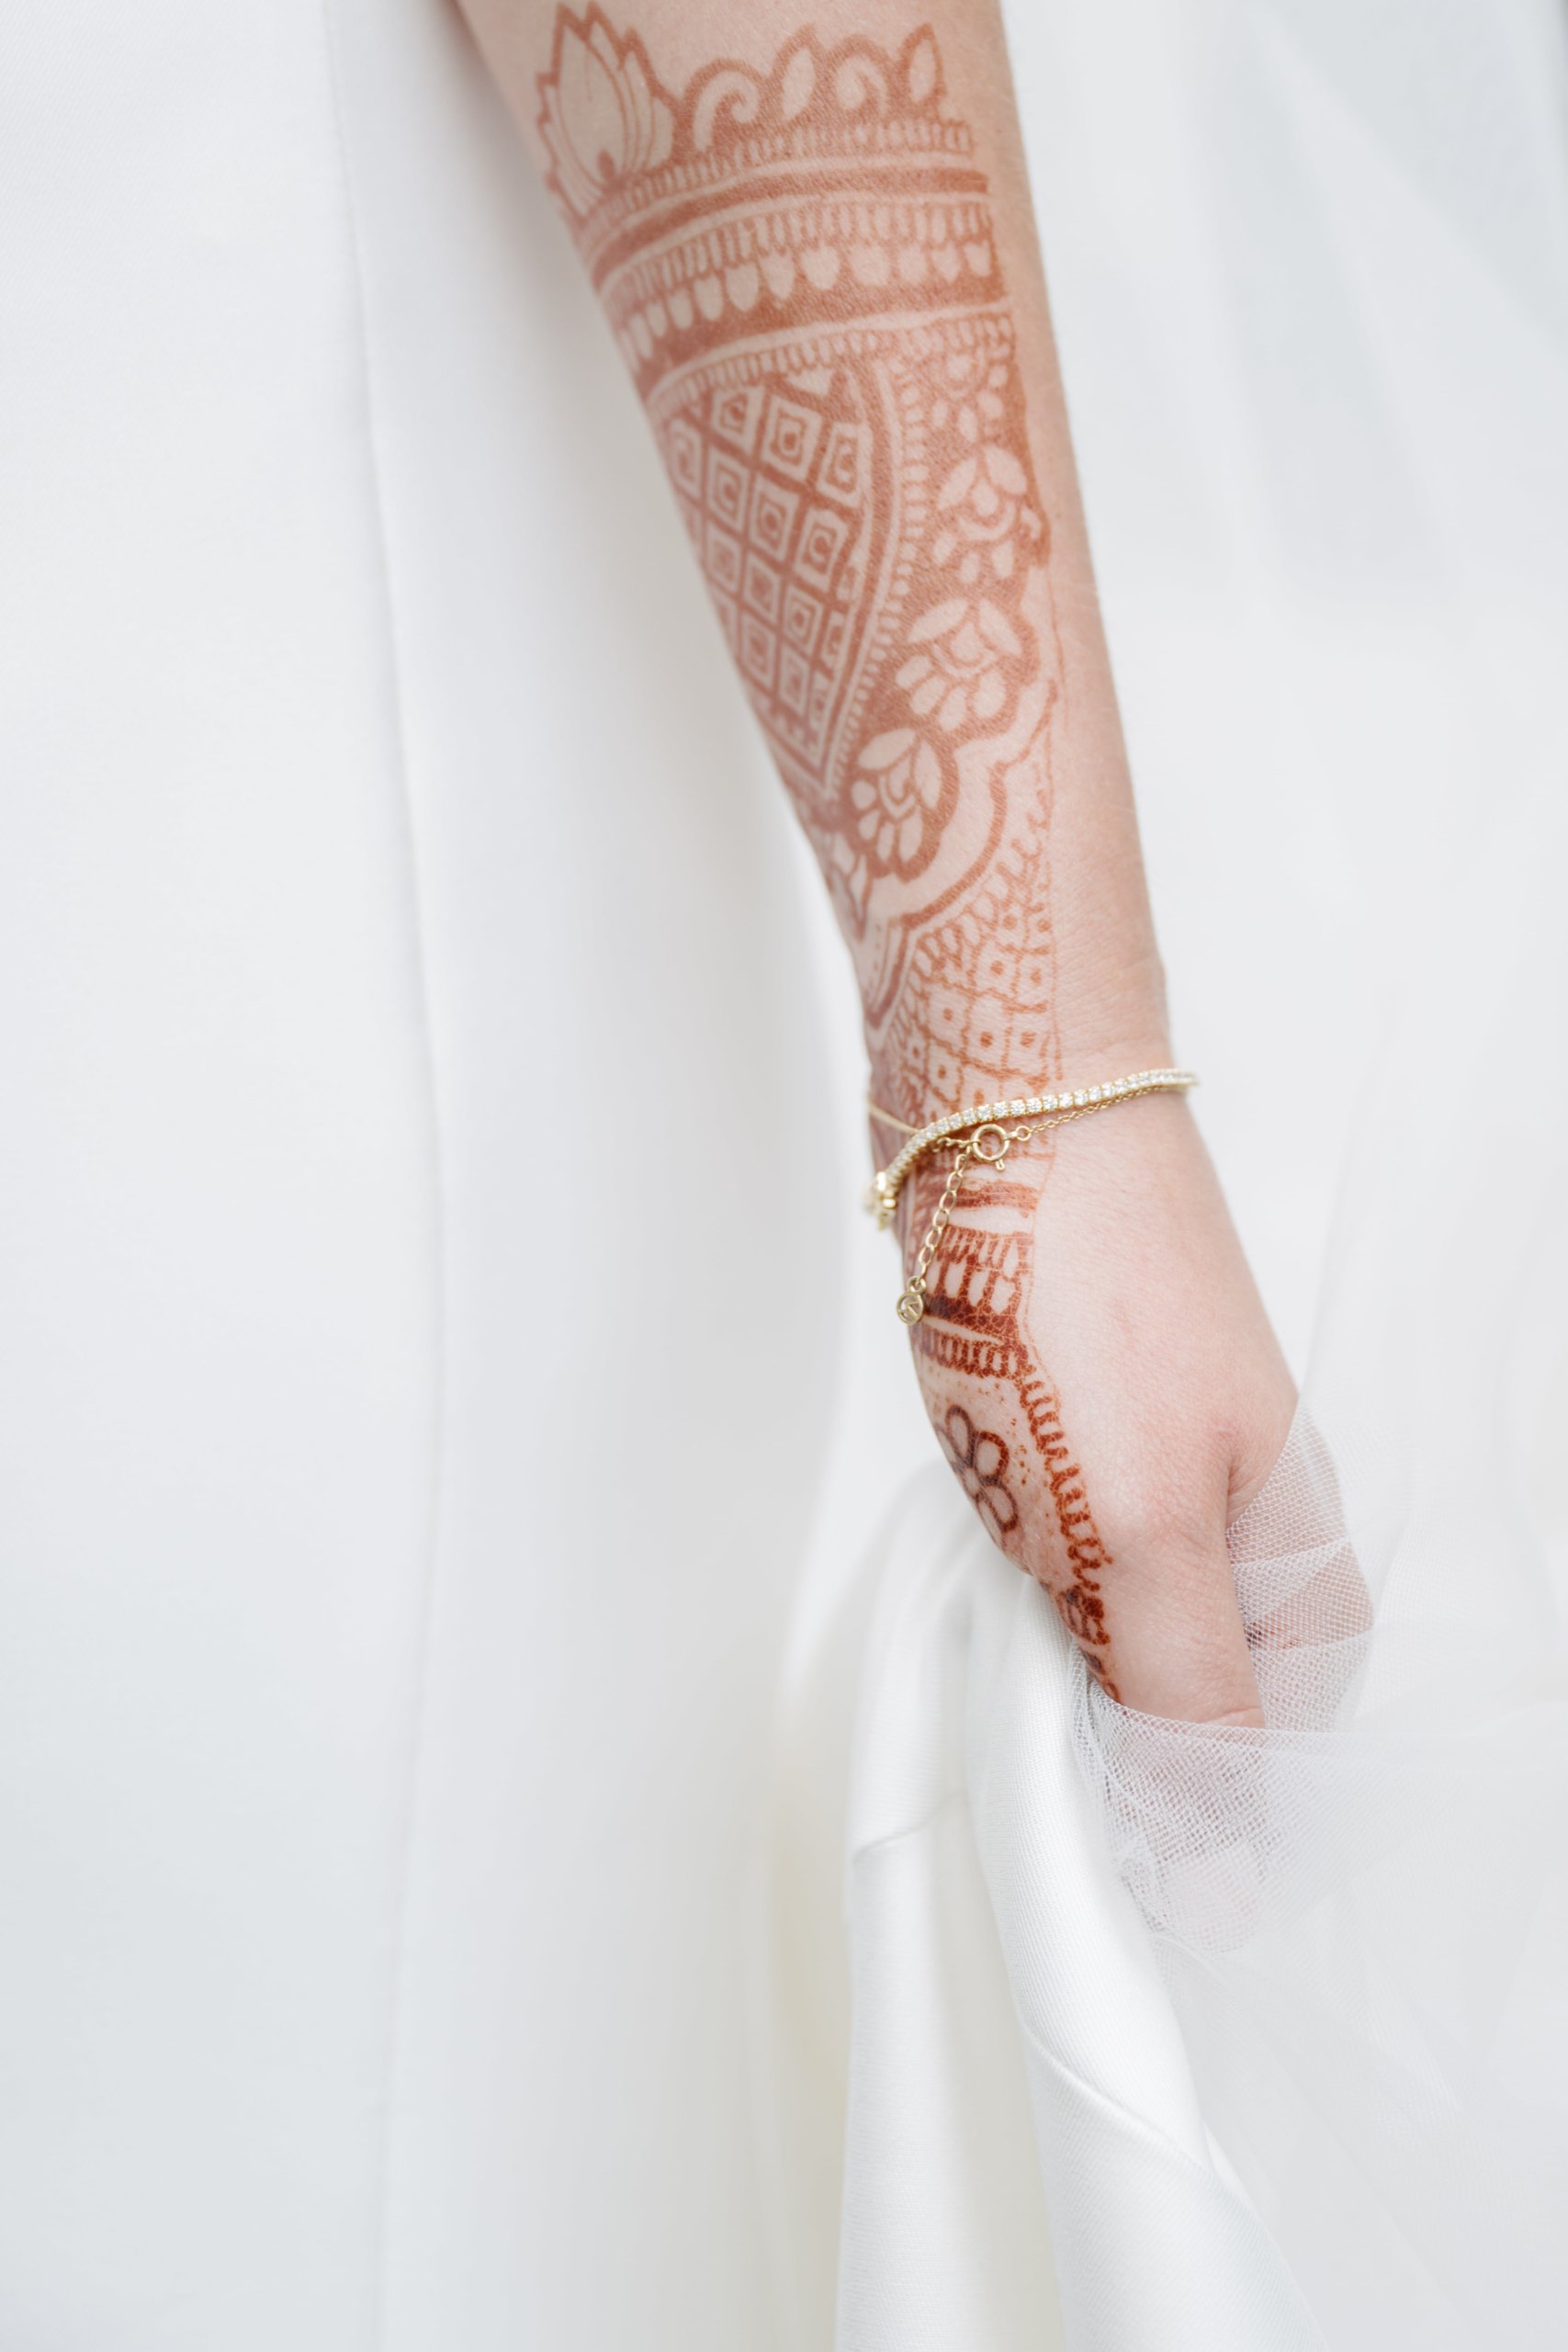 Indian Fusion Wedding Uptown Charlotte 1067 min scaled -